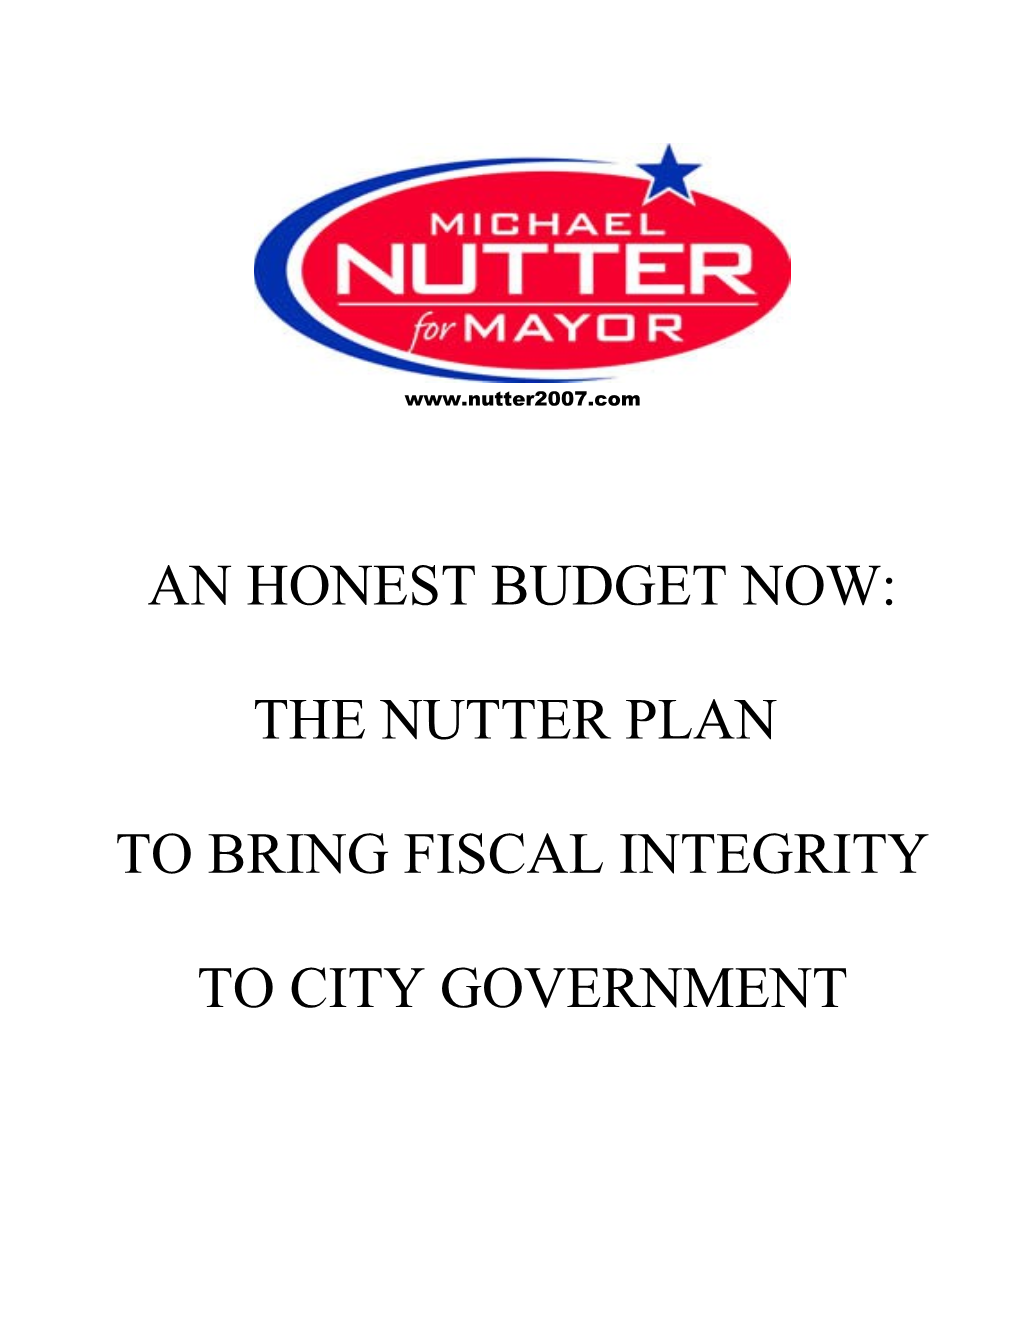 An Honest Budget Now: the Nutter Plan to Bring Fiscal Integrity to City Government